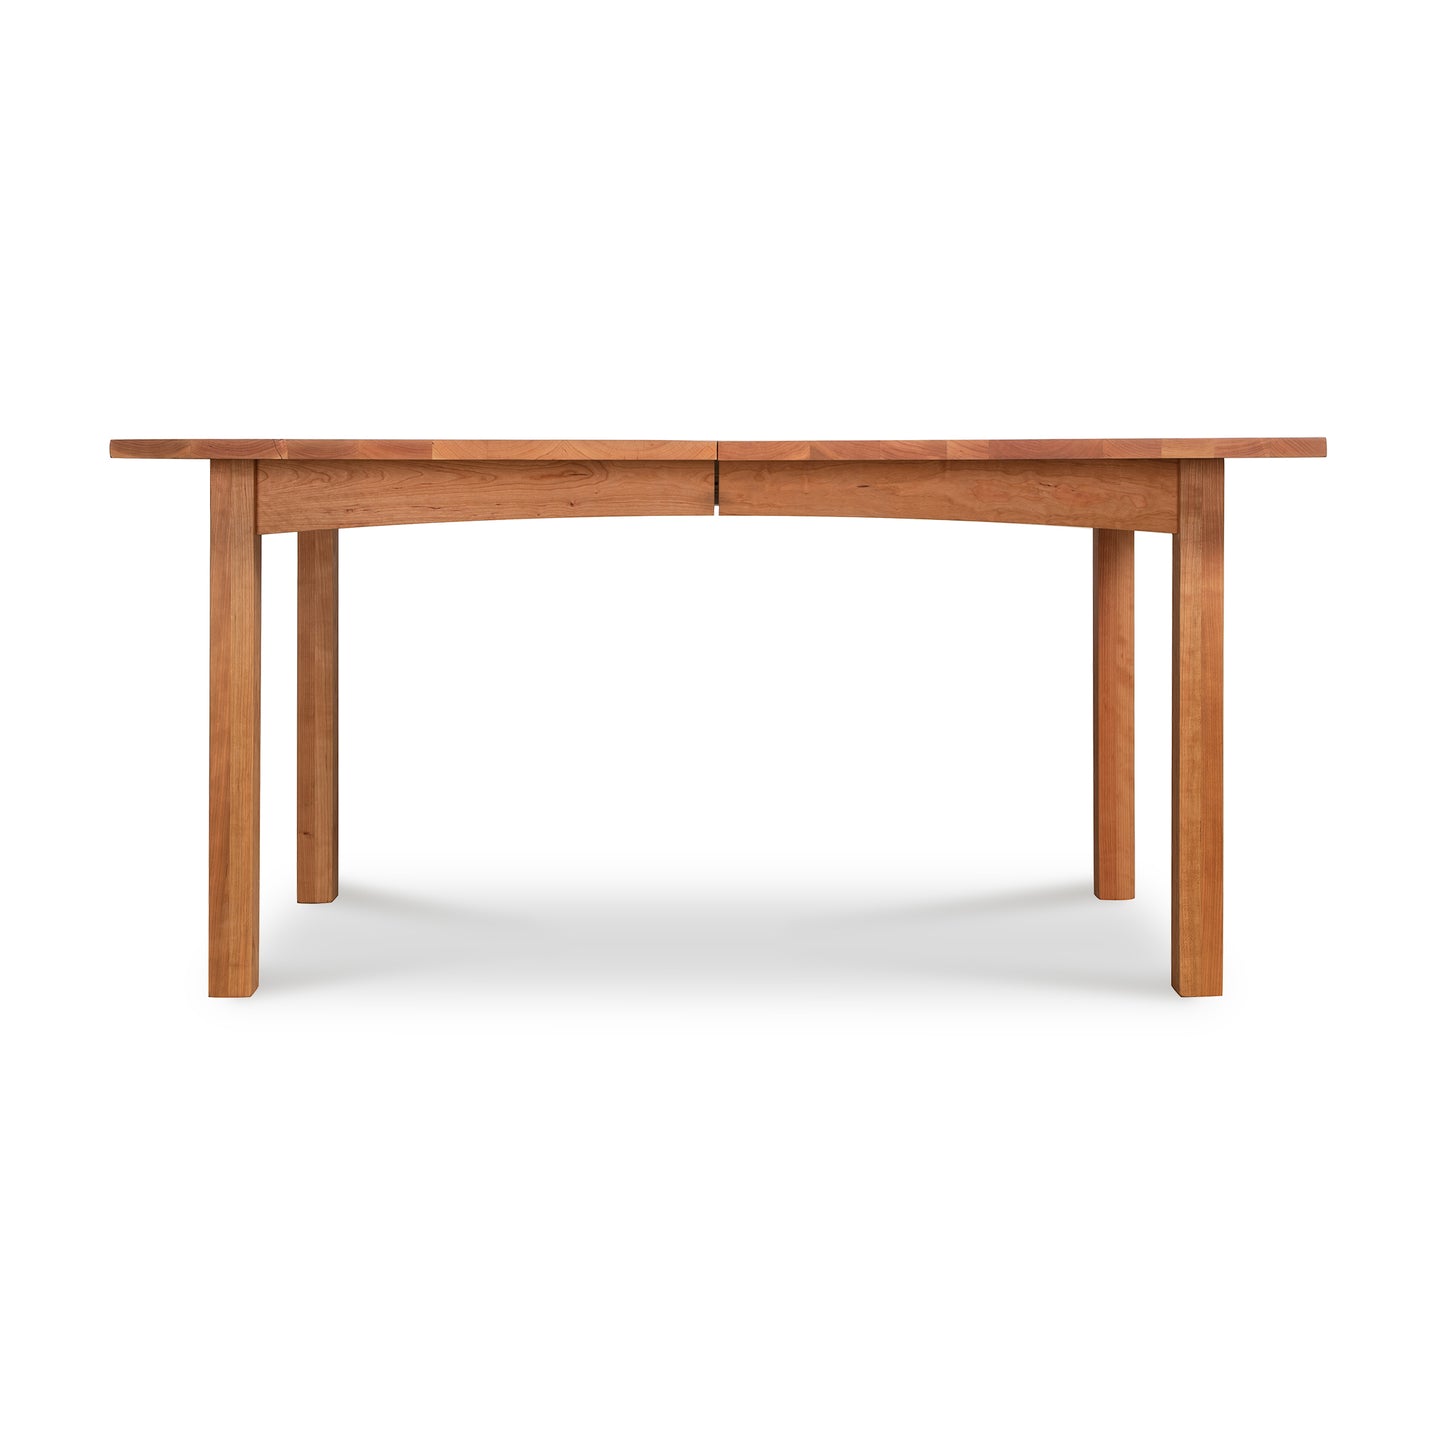 A Burlington Shaker Extension Dining Table by Vermont Furniture Designs, with solid hardwood construction, featuring straight legs and a smooth, rectangular tabletop, displayed against a white background.